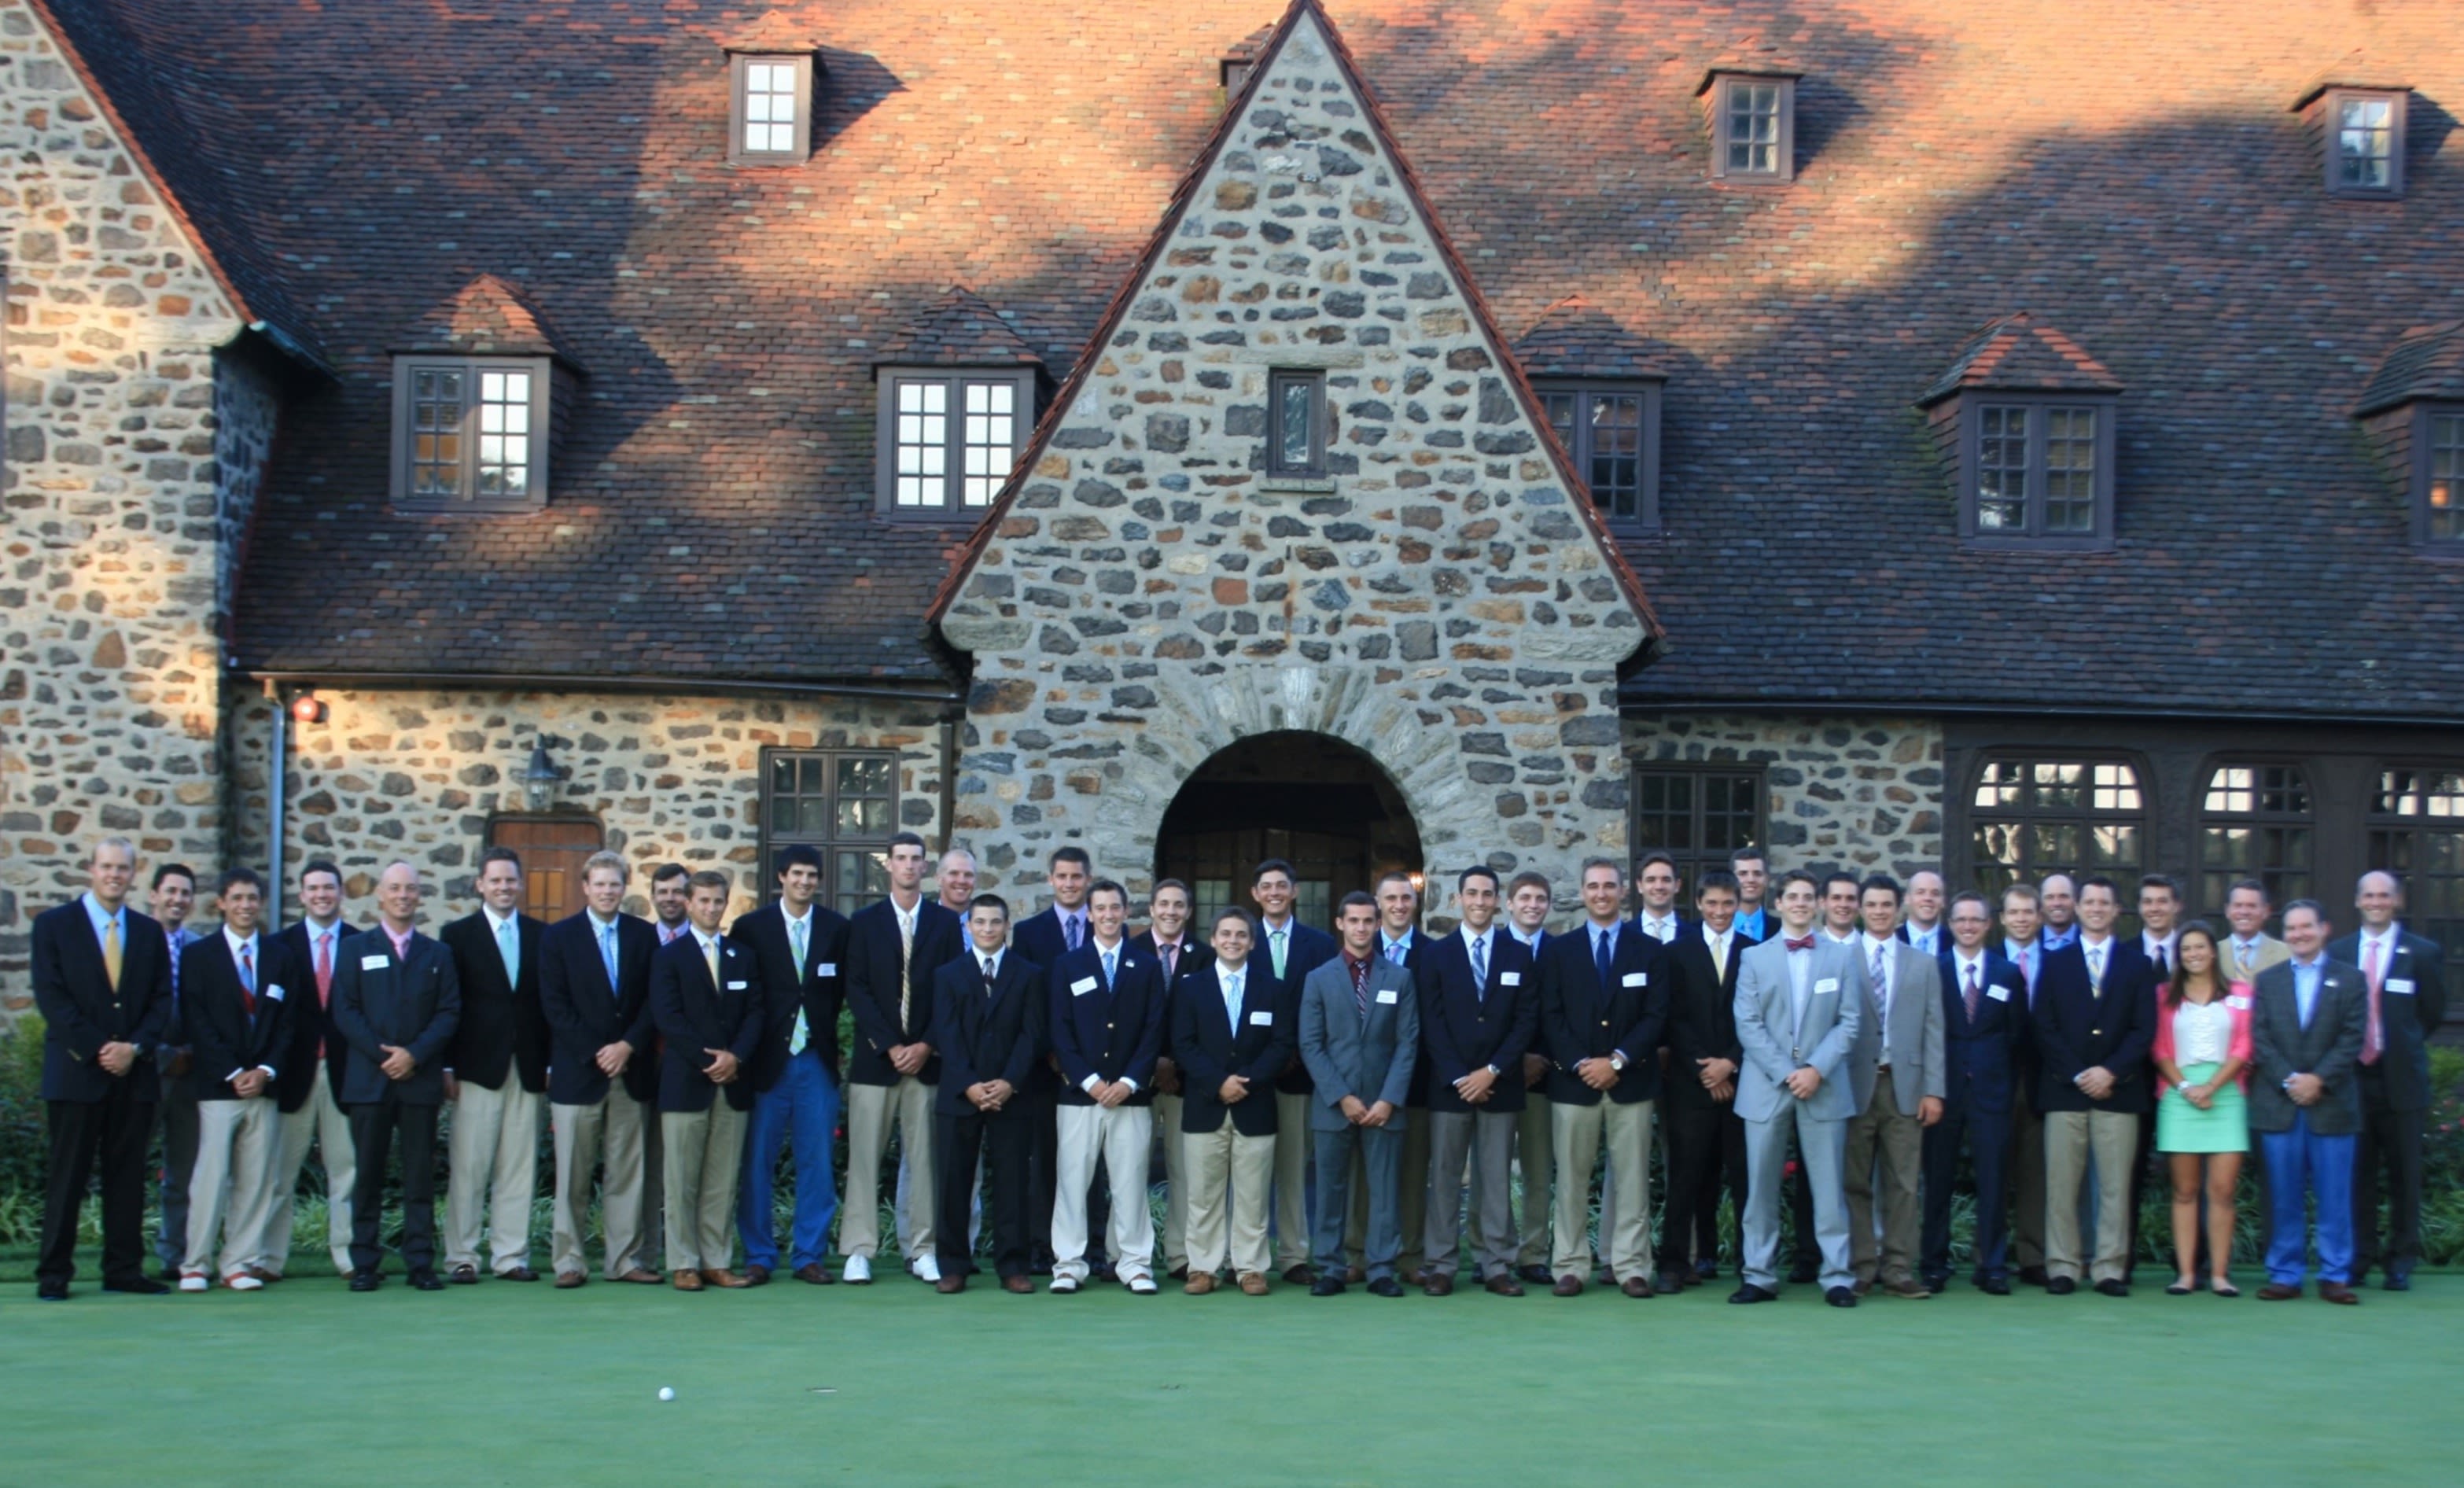 Aronimink Golf Club, site of the 2026 PGA Championship, has hosted the Intern Conference.